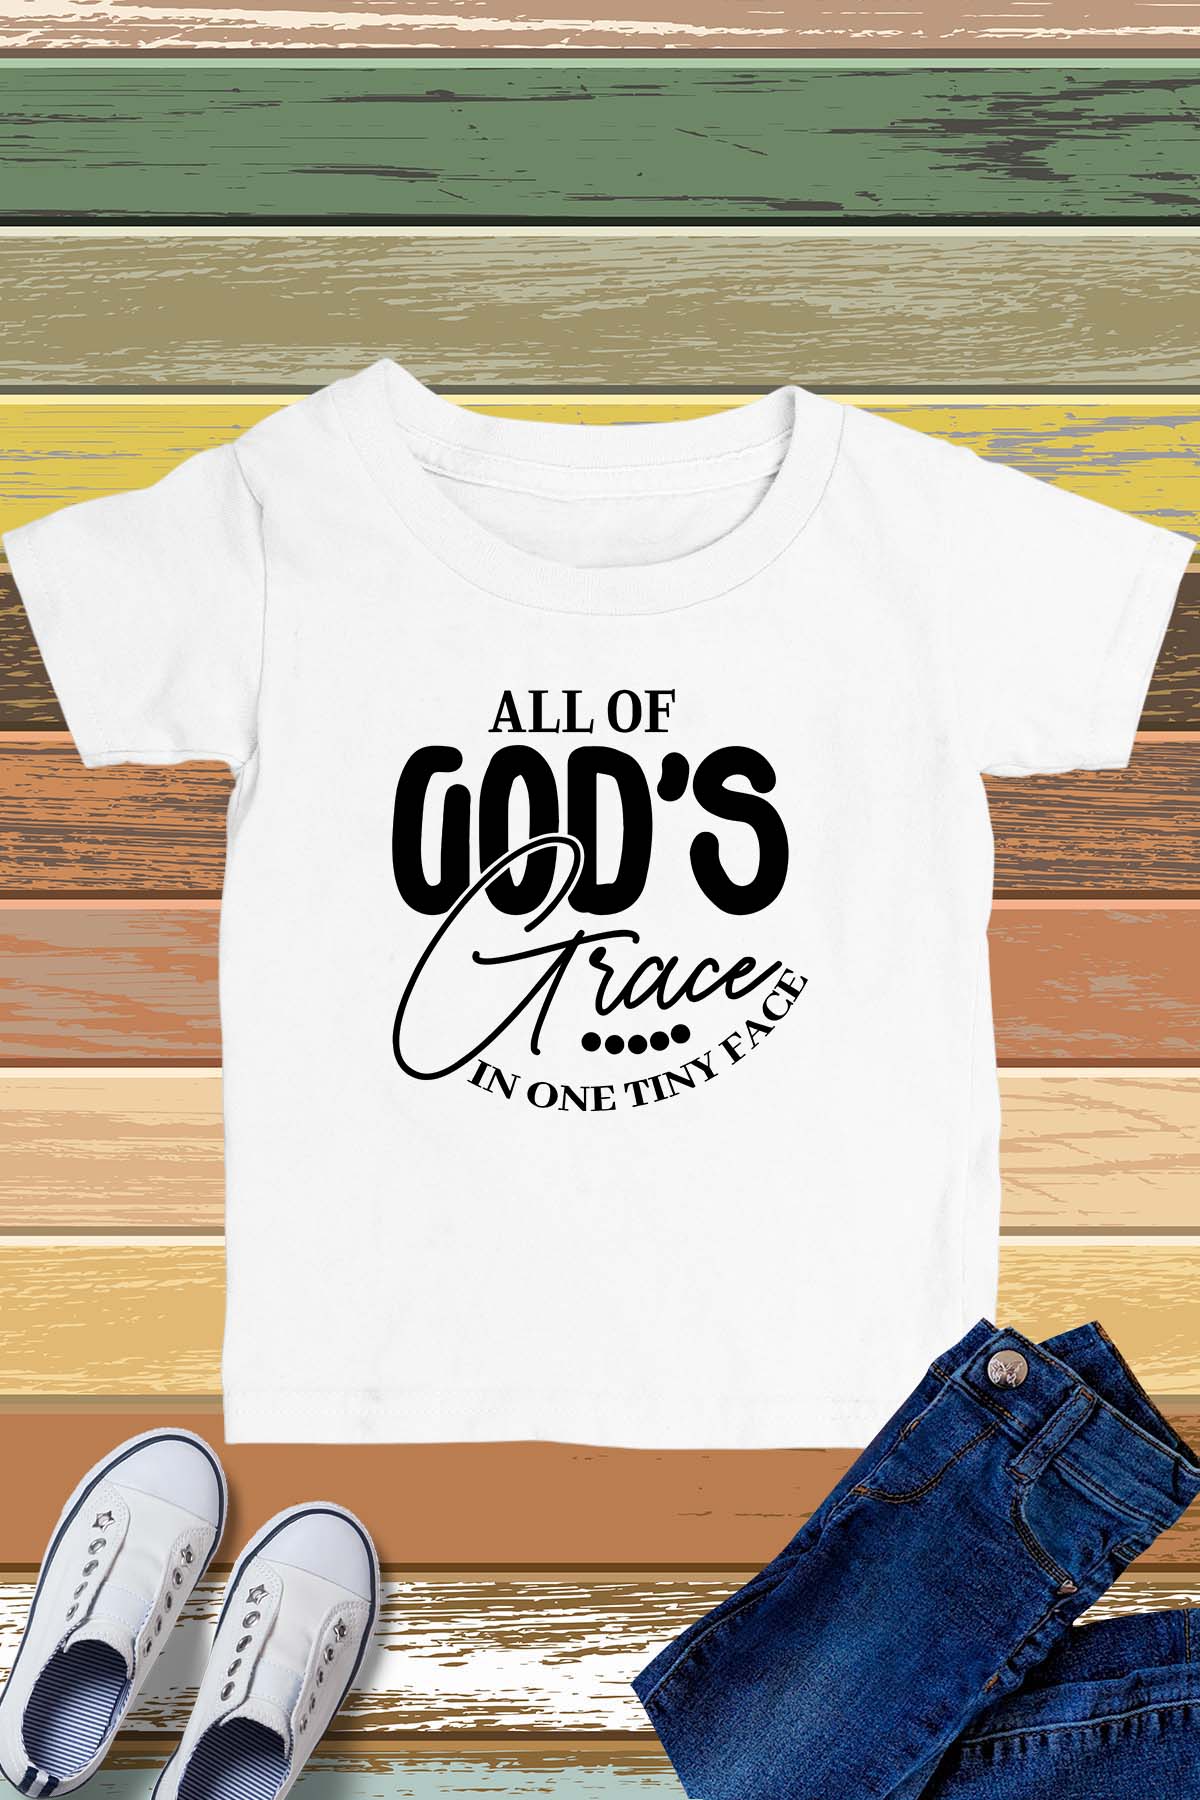 All of God's Grace In One Tiny face Kids Shirt